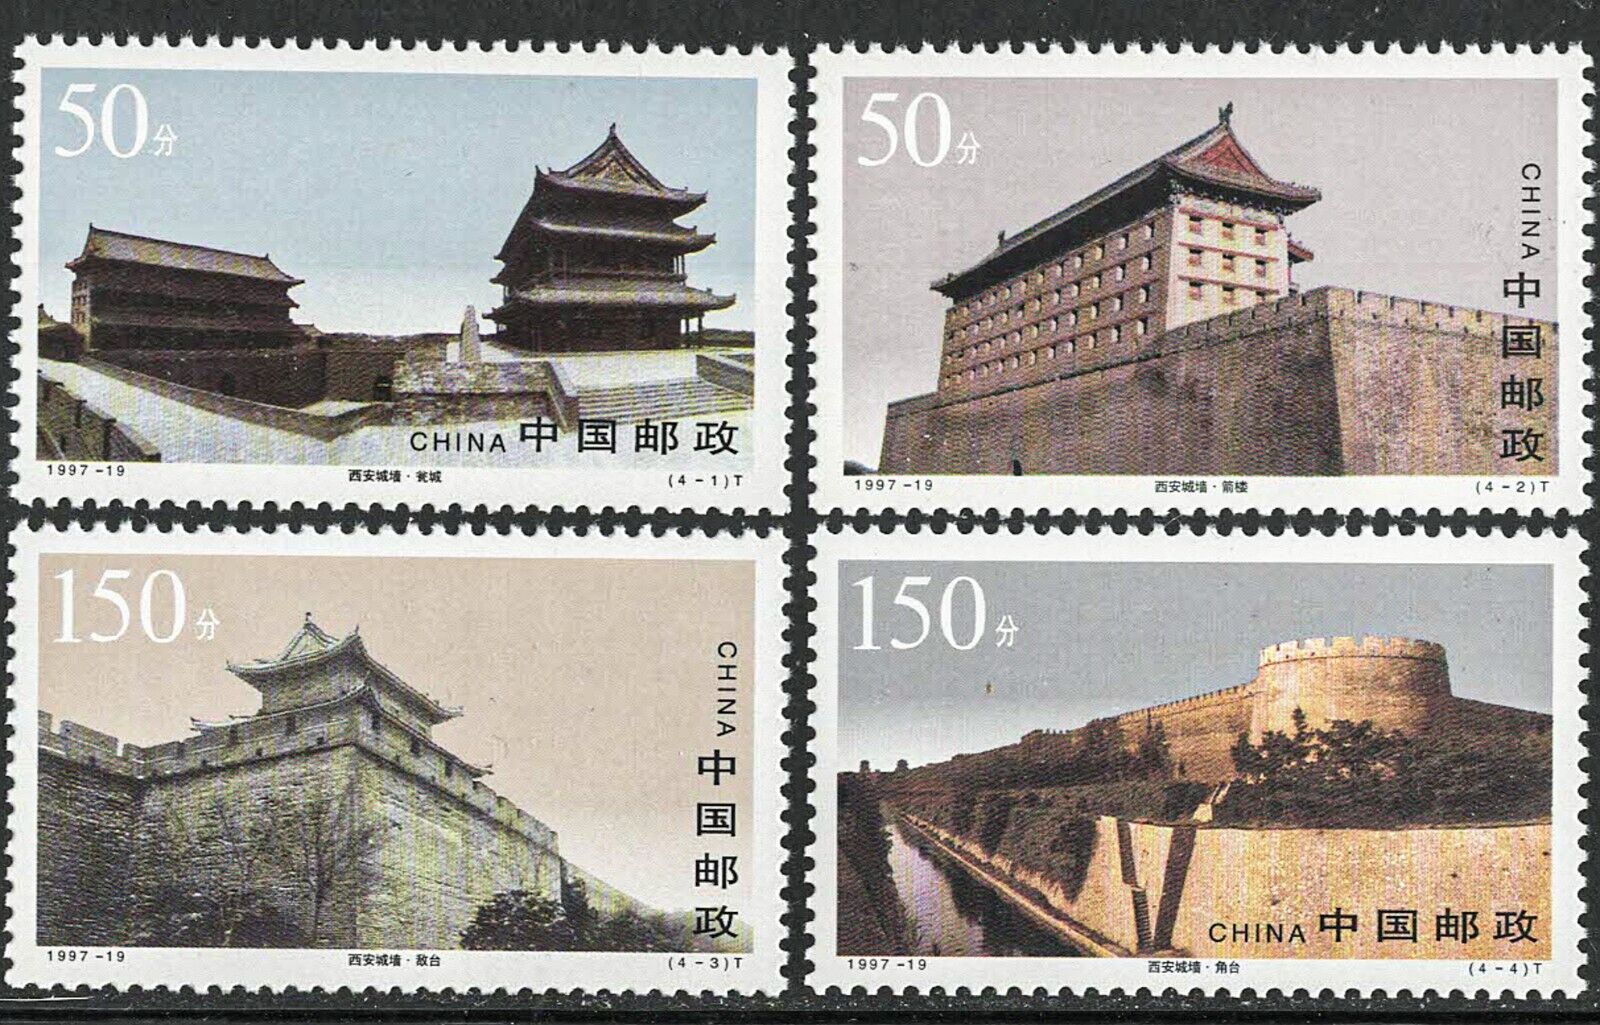 China 1997-19 The City Wall Of Xi'an Stamp Set Of 4, Mint Nh (u.s. #2806-09)